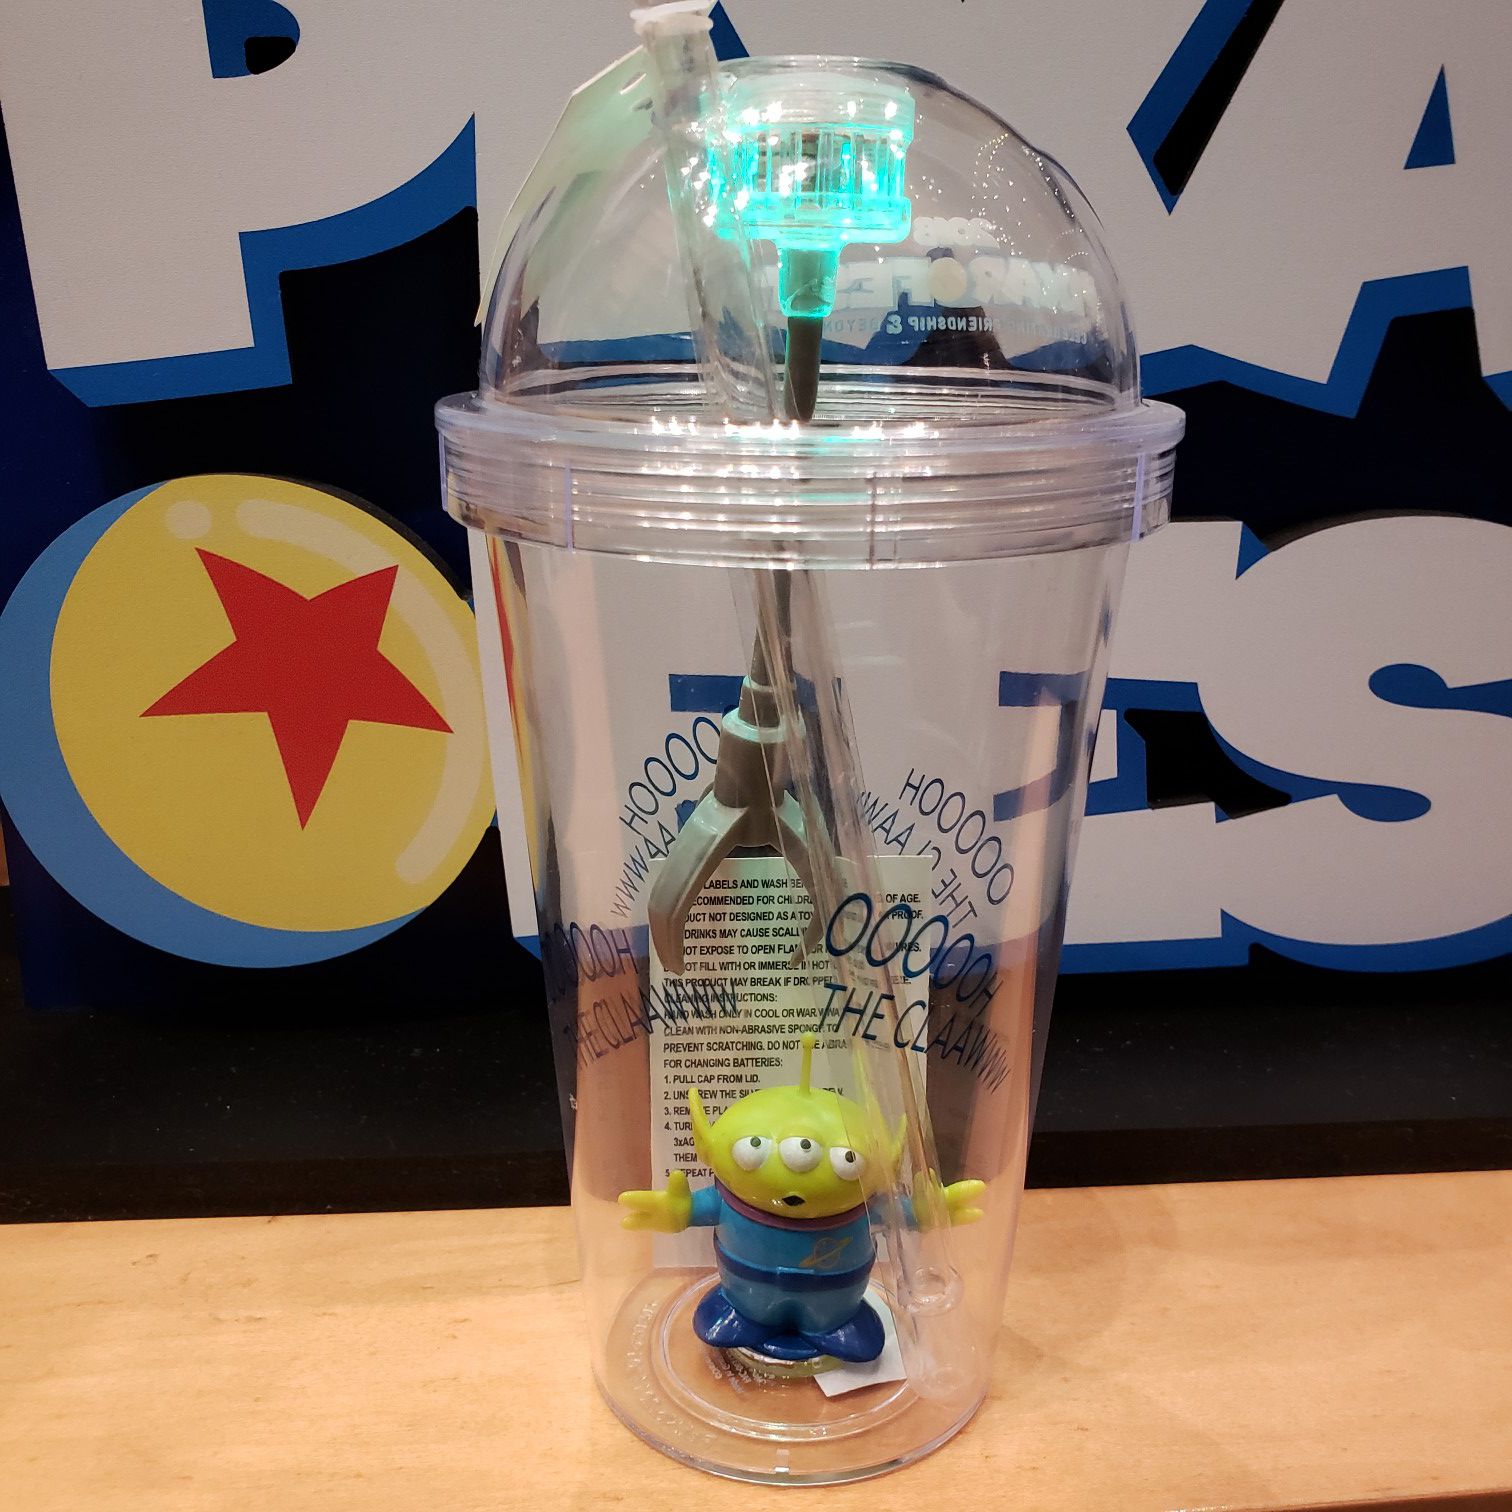 We Just Found The COOLEST Disney Princess and Toy Story Light-Up Cups in  Disney World!